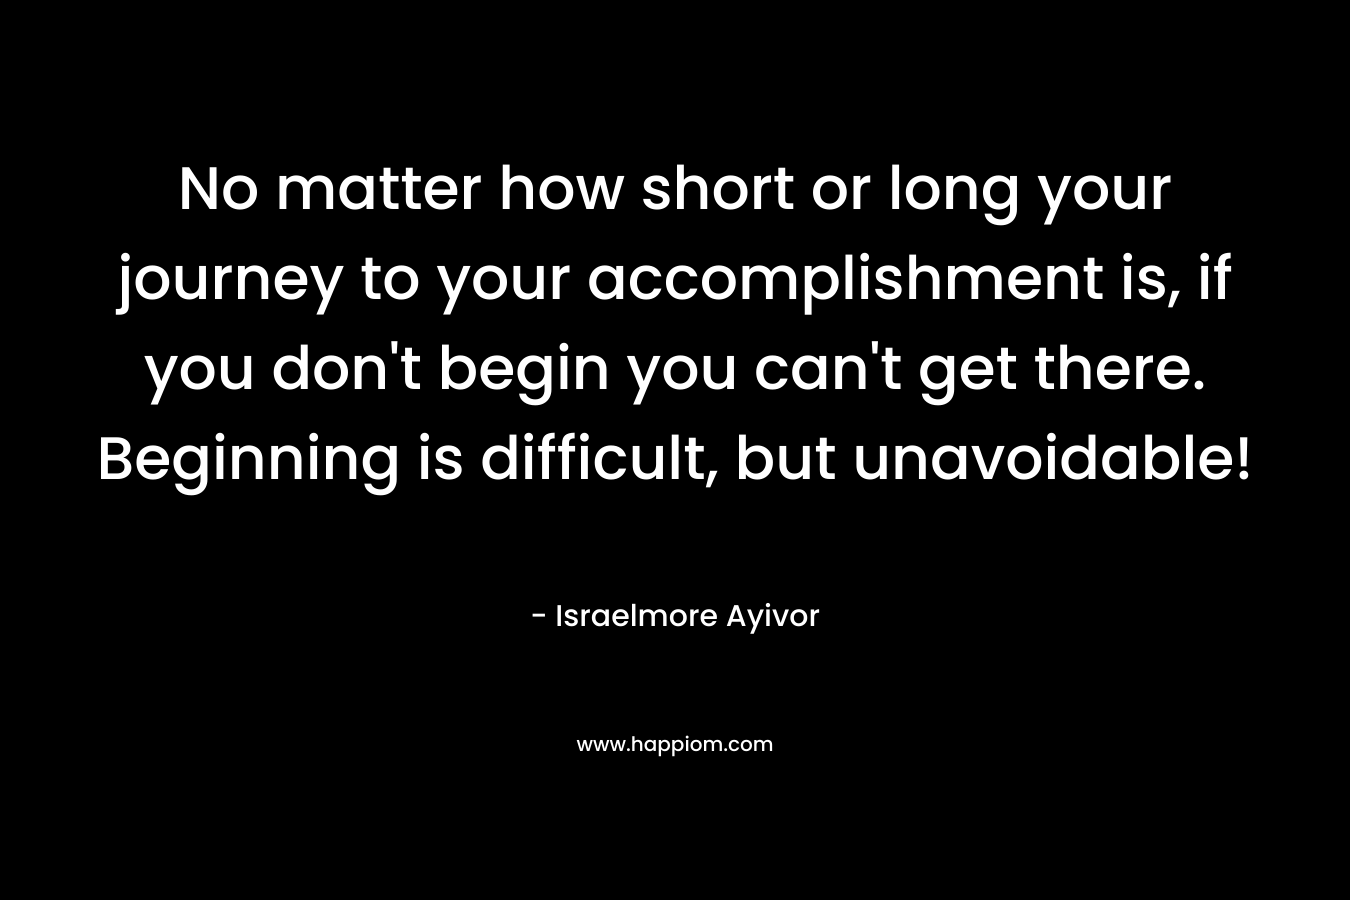 No matter how short or long your journey to your accomplishment is, if you don't begin you can't get there. Beginning is difficult, but unavoidable!